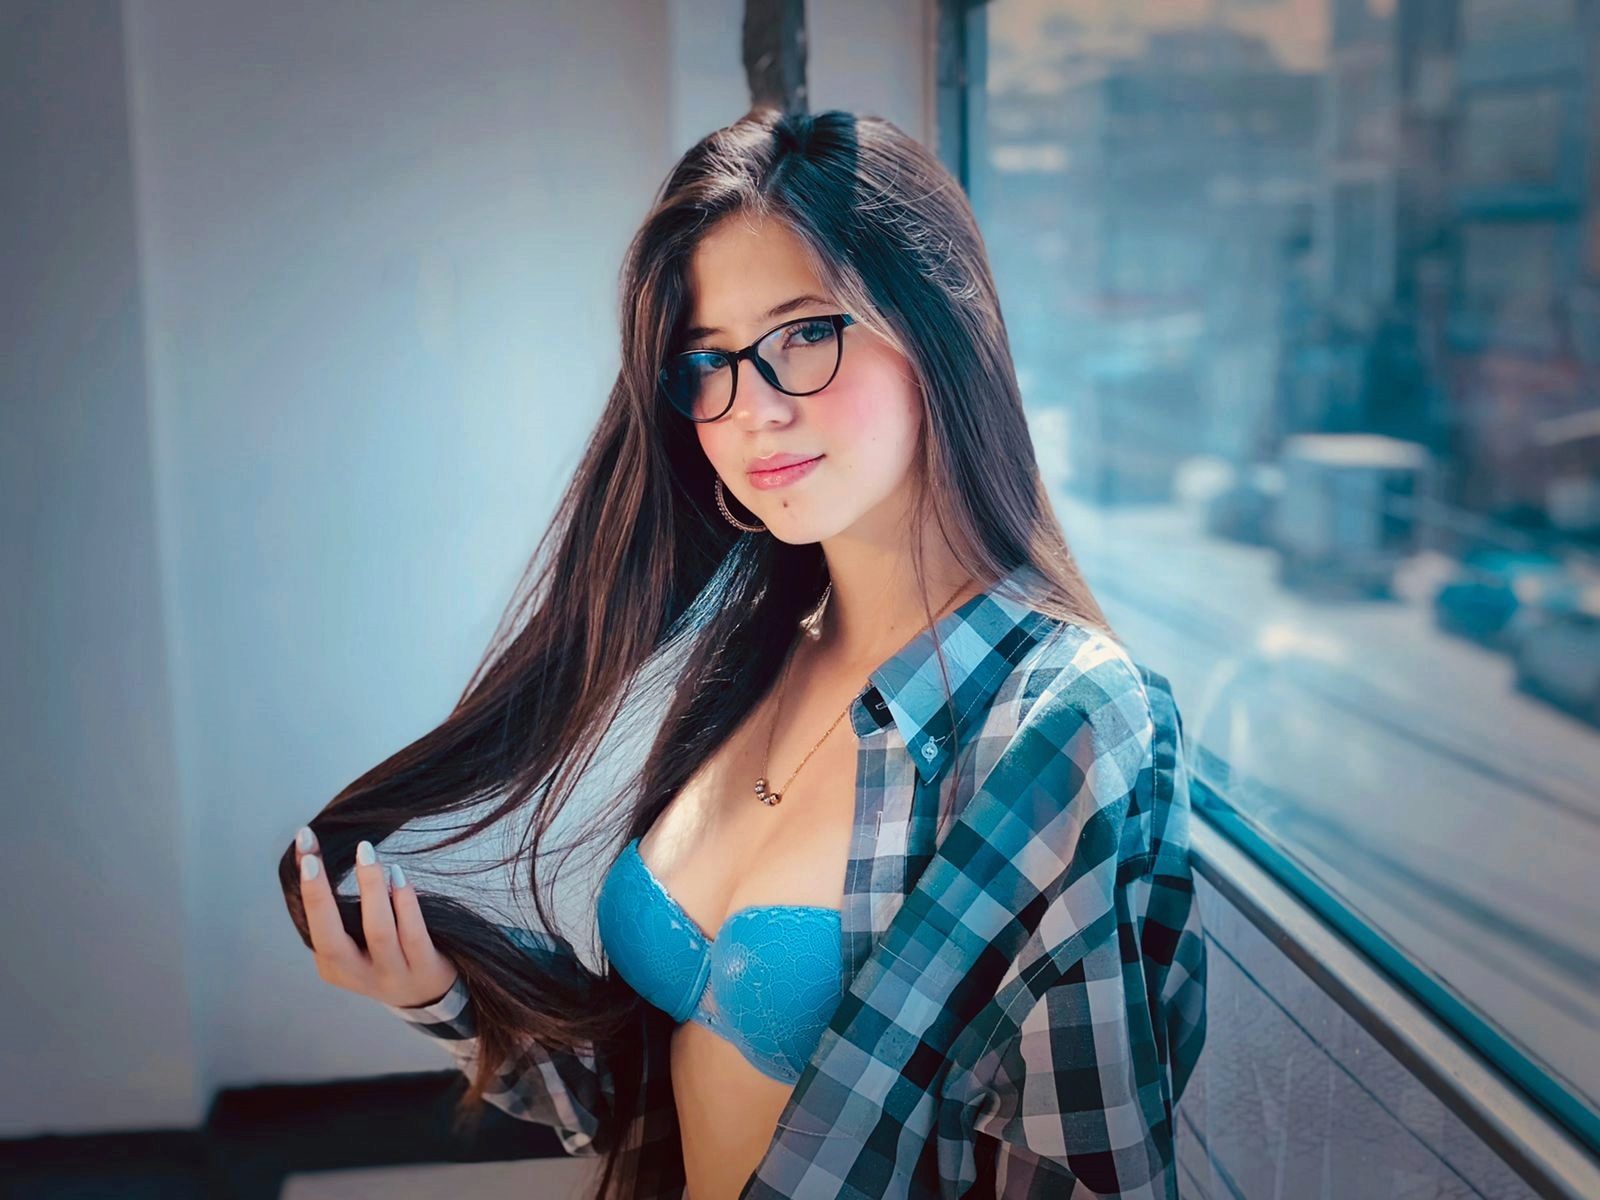 Nude Chat with Sarah Soler on Live Cam ⋆ FLIRT SHOW ⋆ Webcam Sex With Amateurs